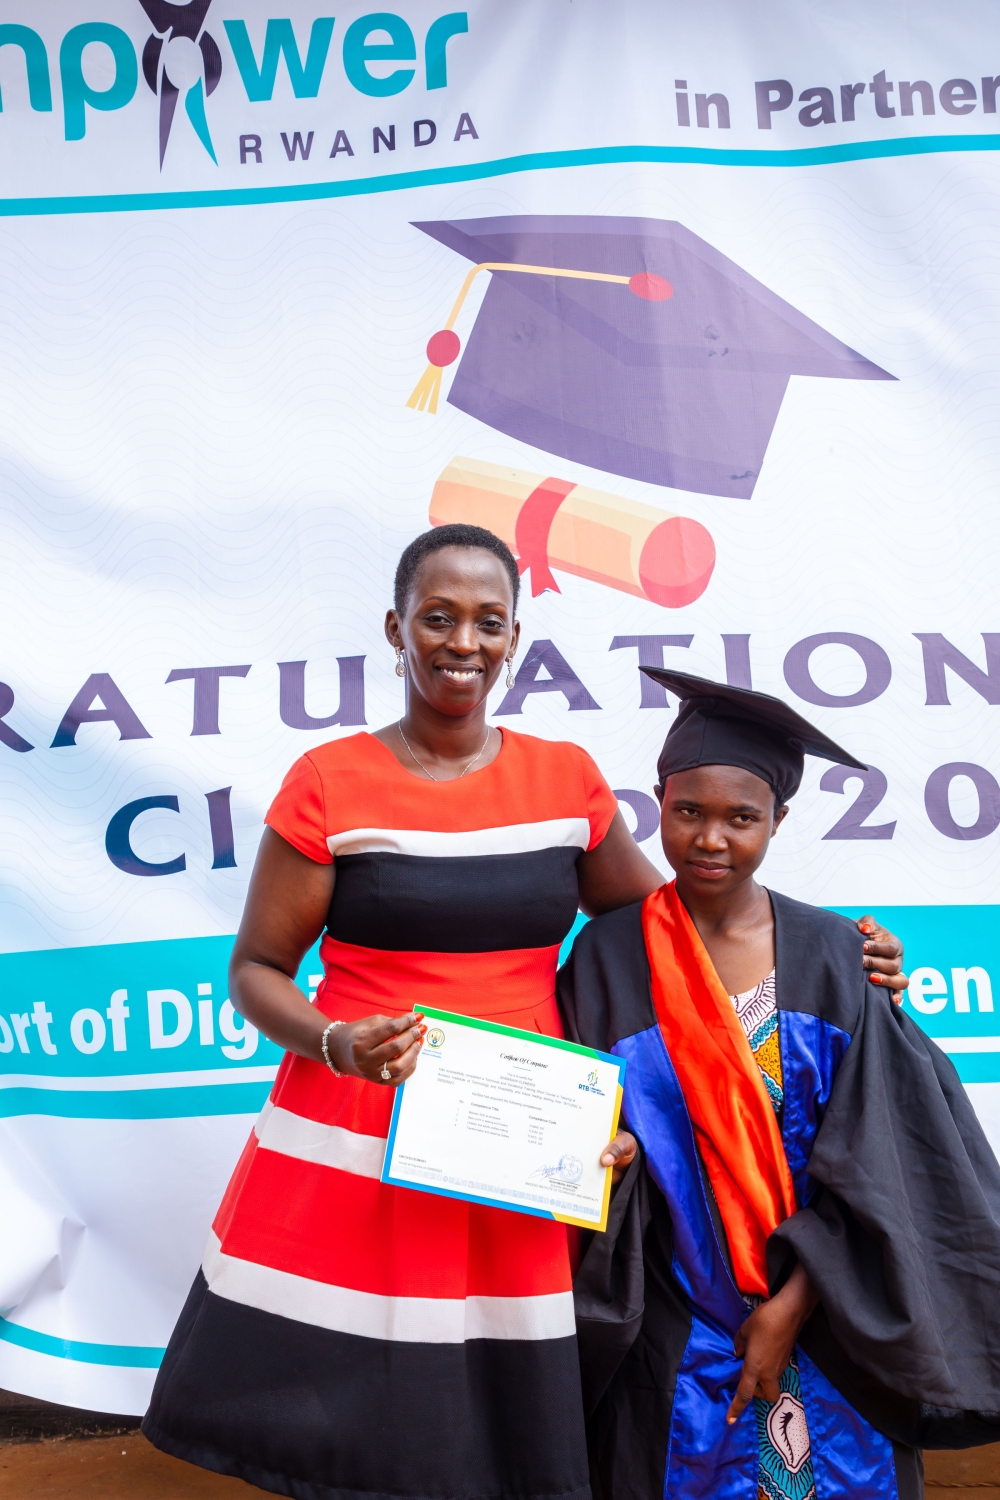 Empower Rwanda&#039;s founder and country director, Olivia Promise Kabatesi, presents a certificate to oneof 100 graduatesat the ceremony in Gatsibo